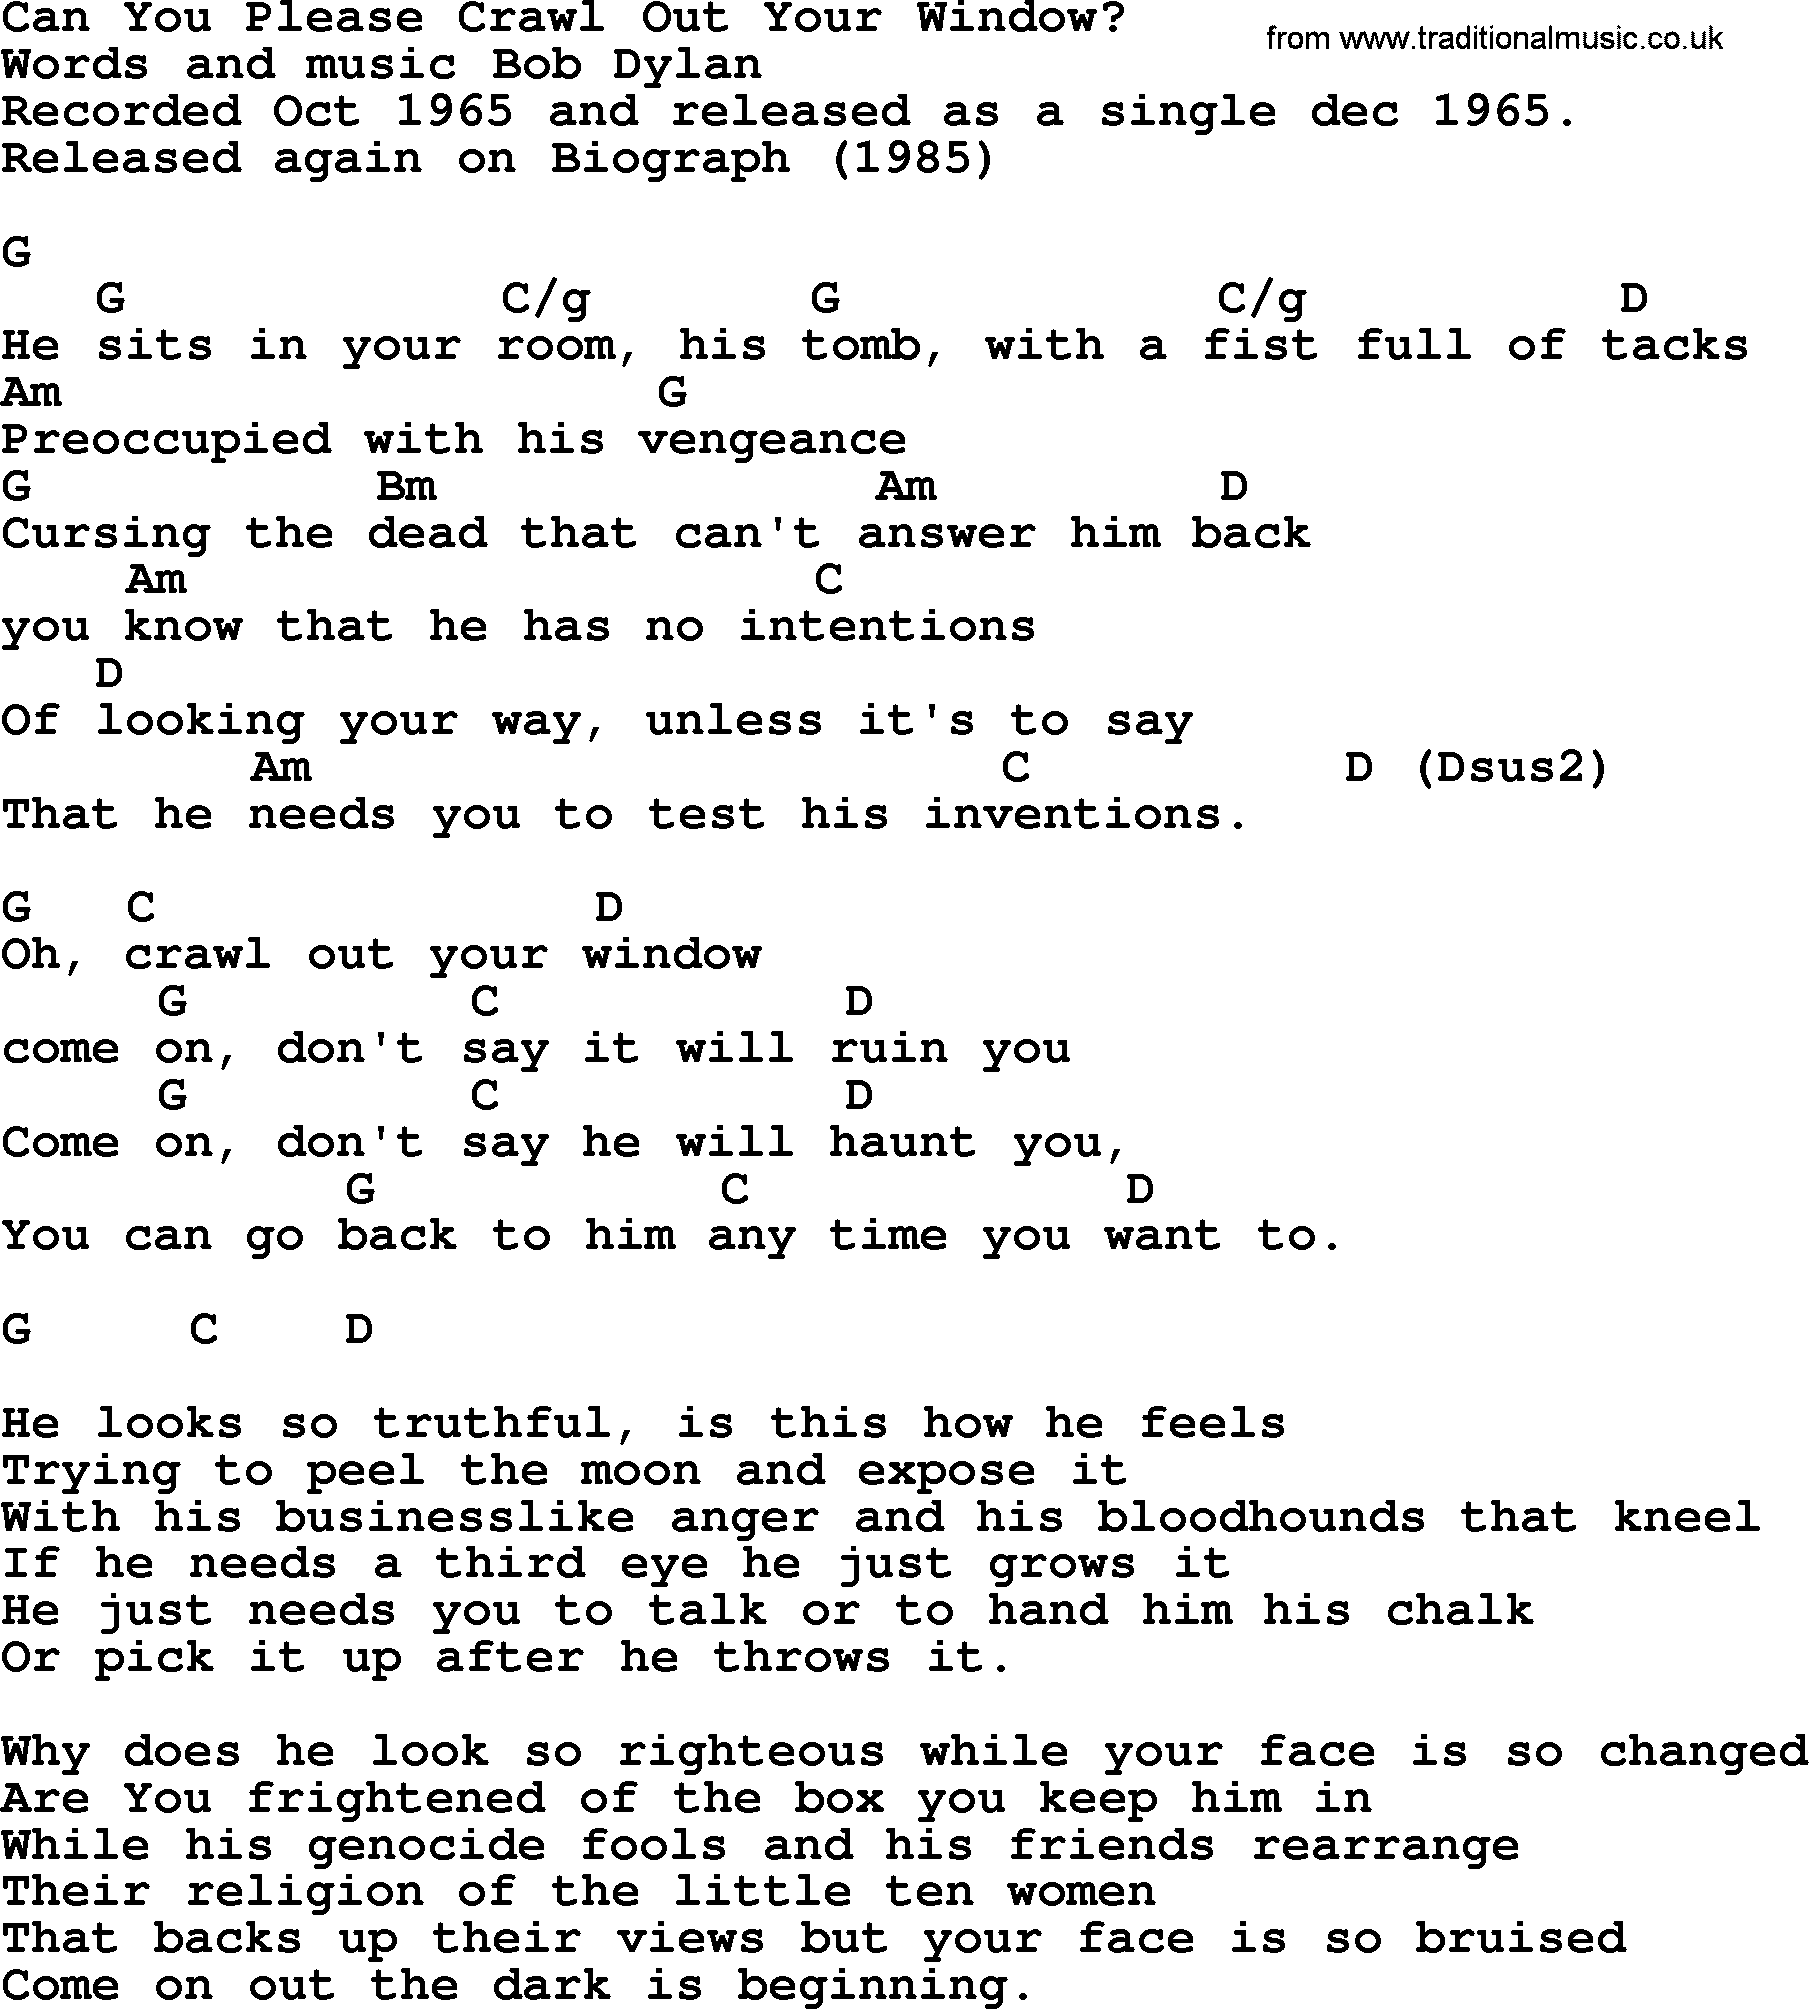 Bob Dylan song, lyrics with chords - Can You Please Crawl Out Your Window